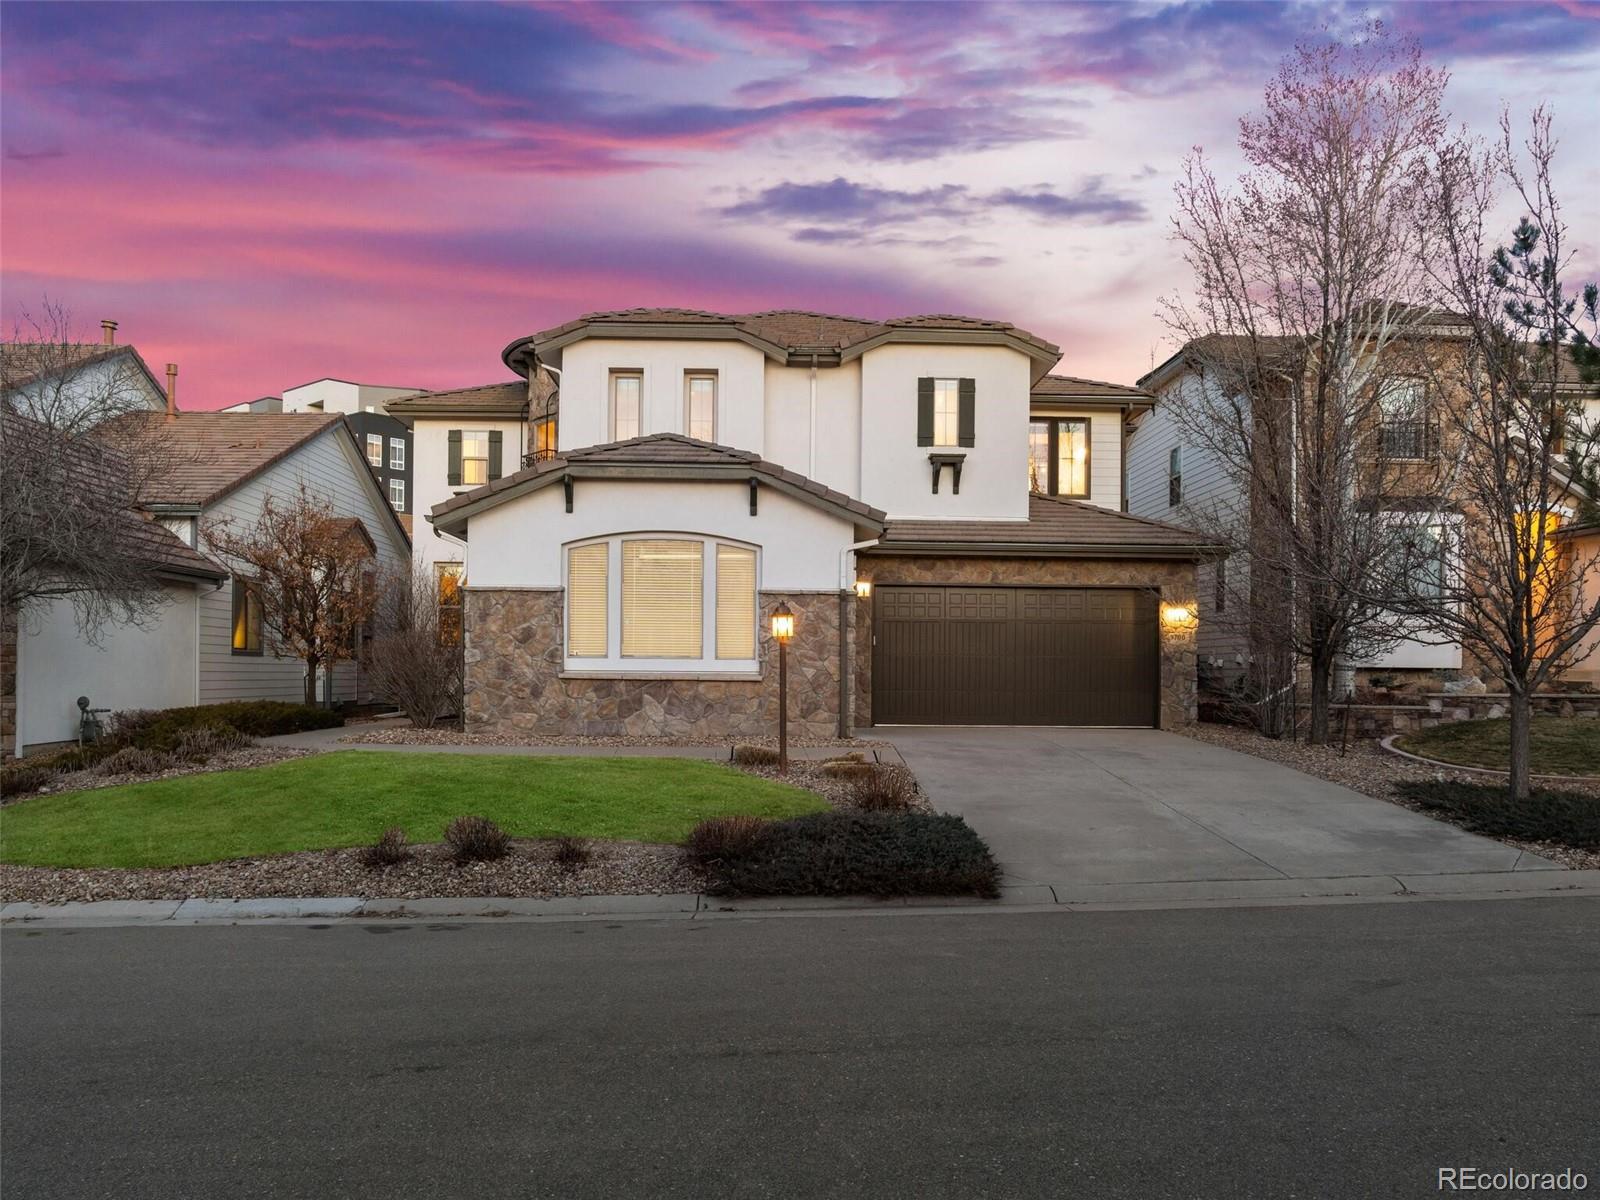 Report Image for 9700  Sunset Hill Circle,Lone Tree, Colorado